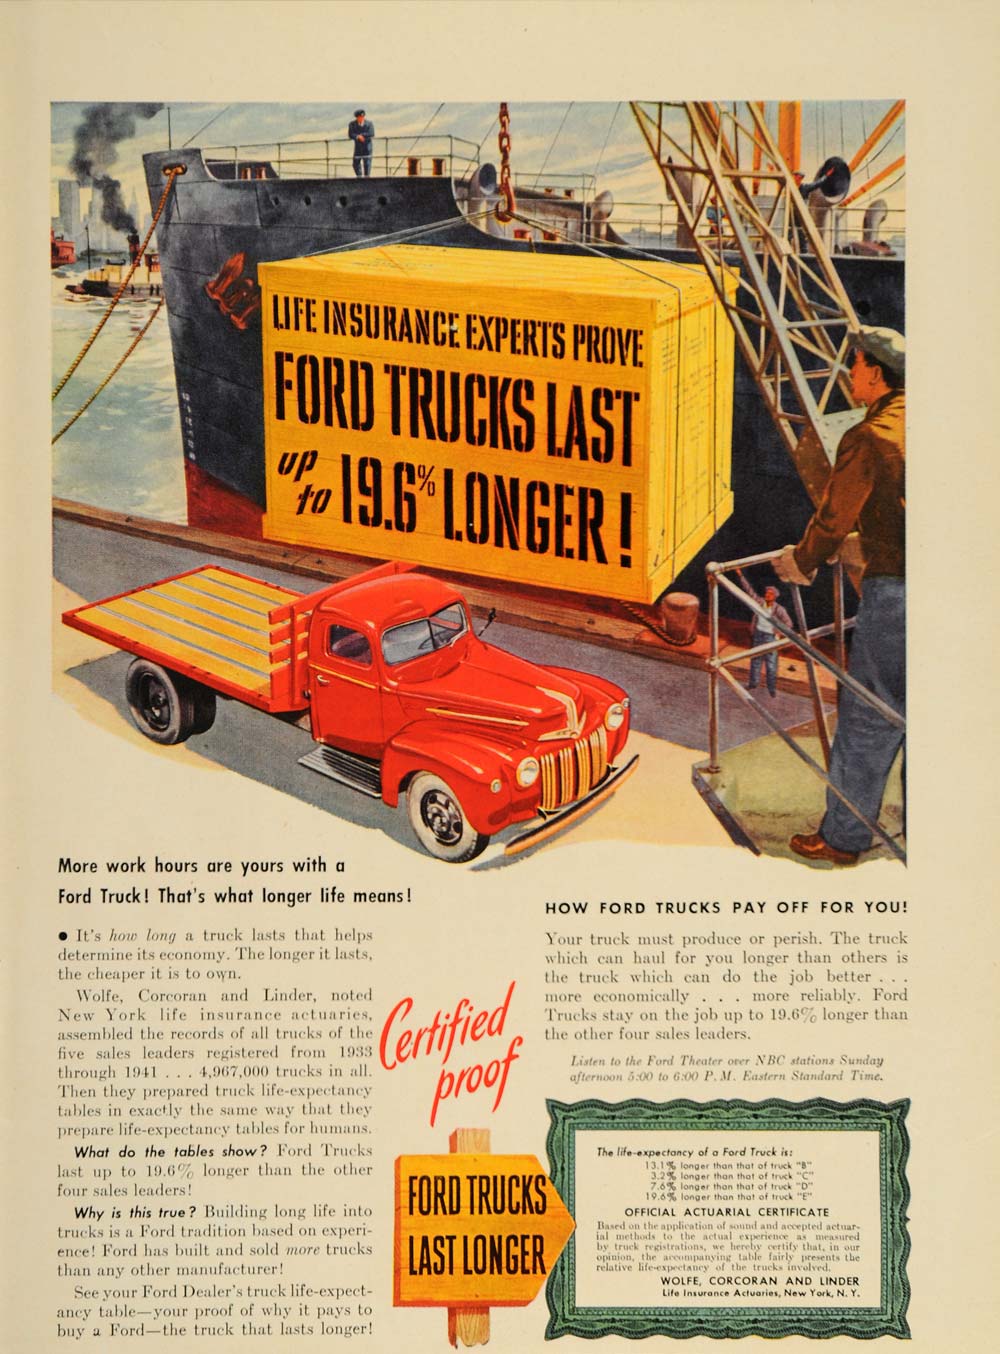 1947 Ad Red Ford Truck Life Expectancy Ship Dockyard - ORIGINAL ADVERTISING TM1